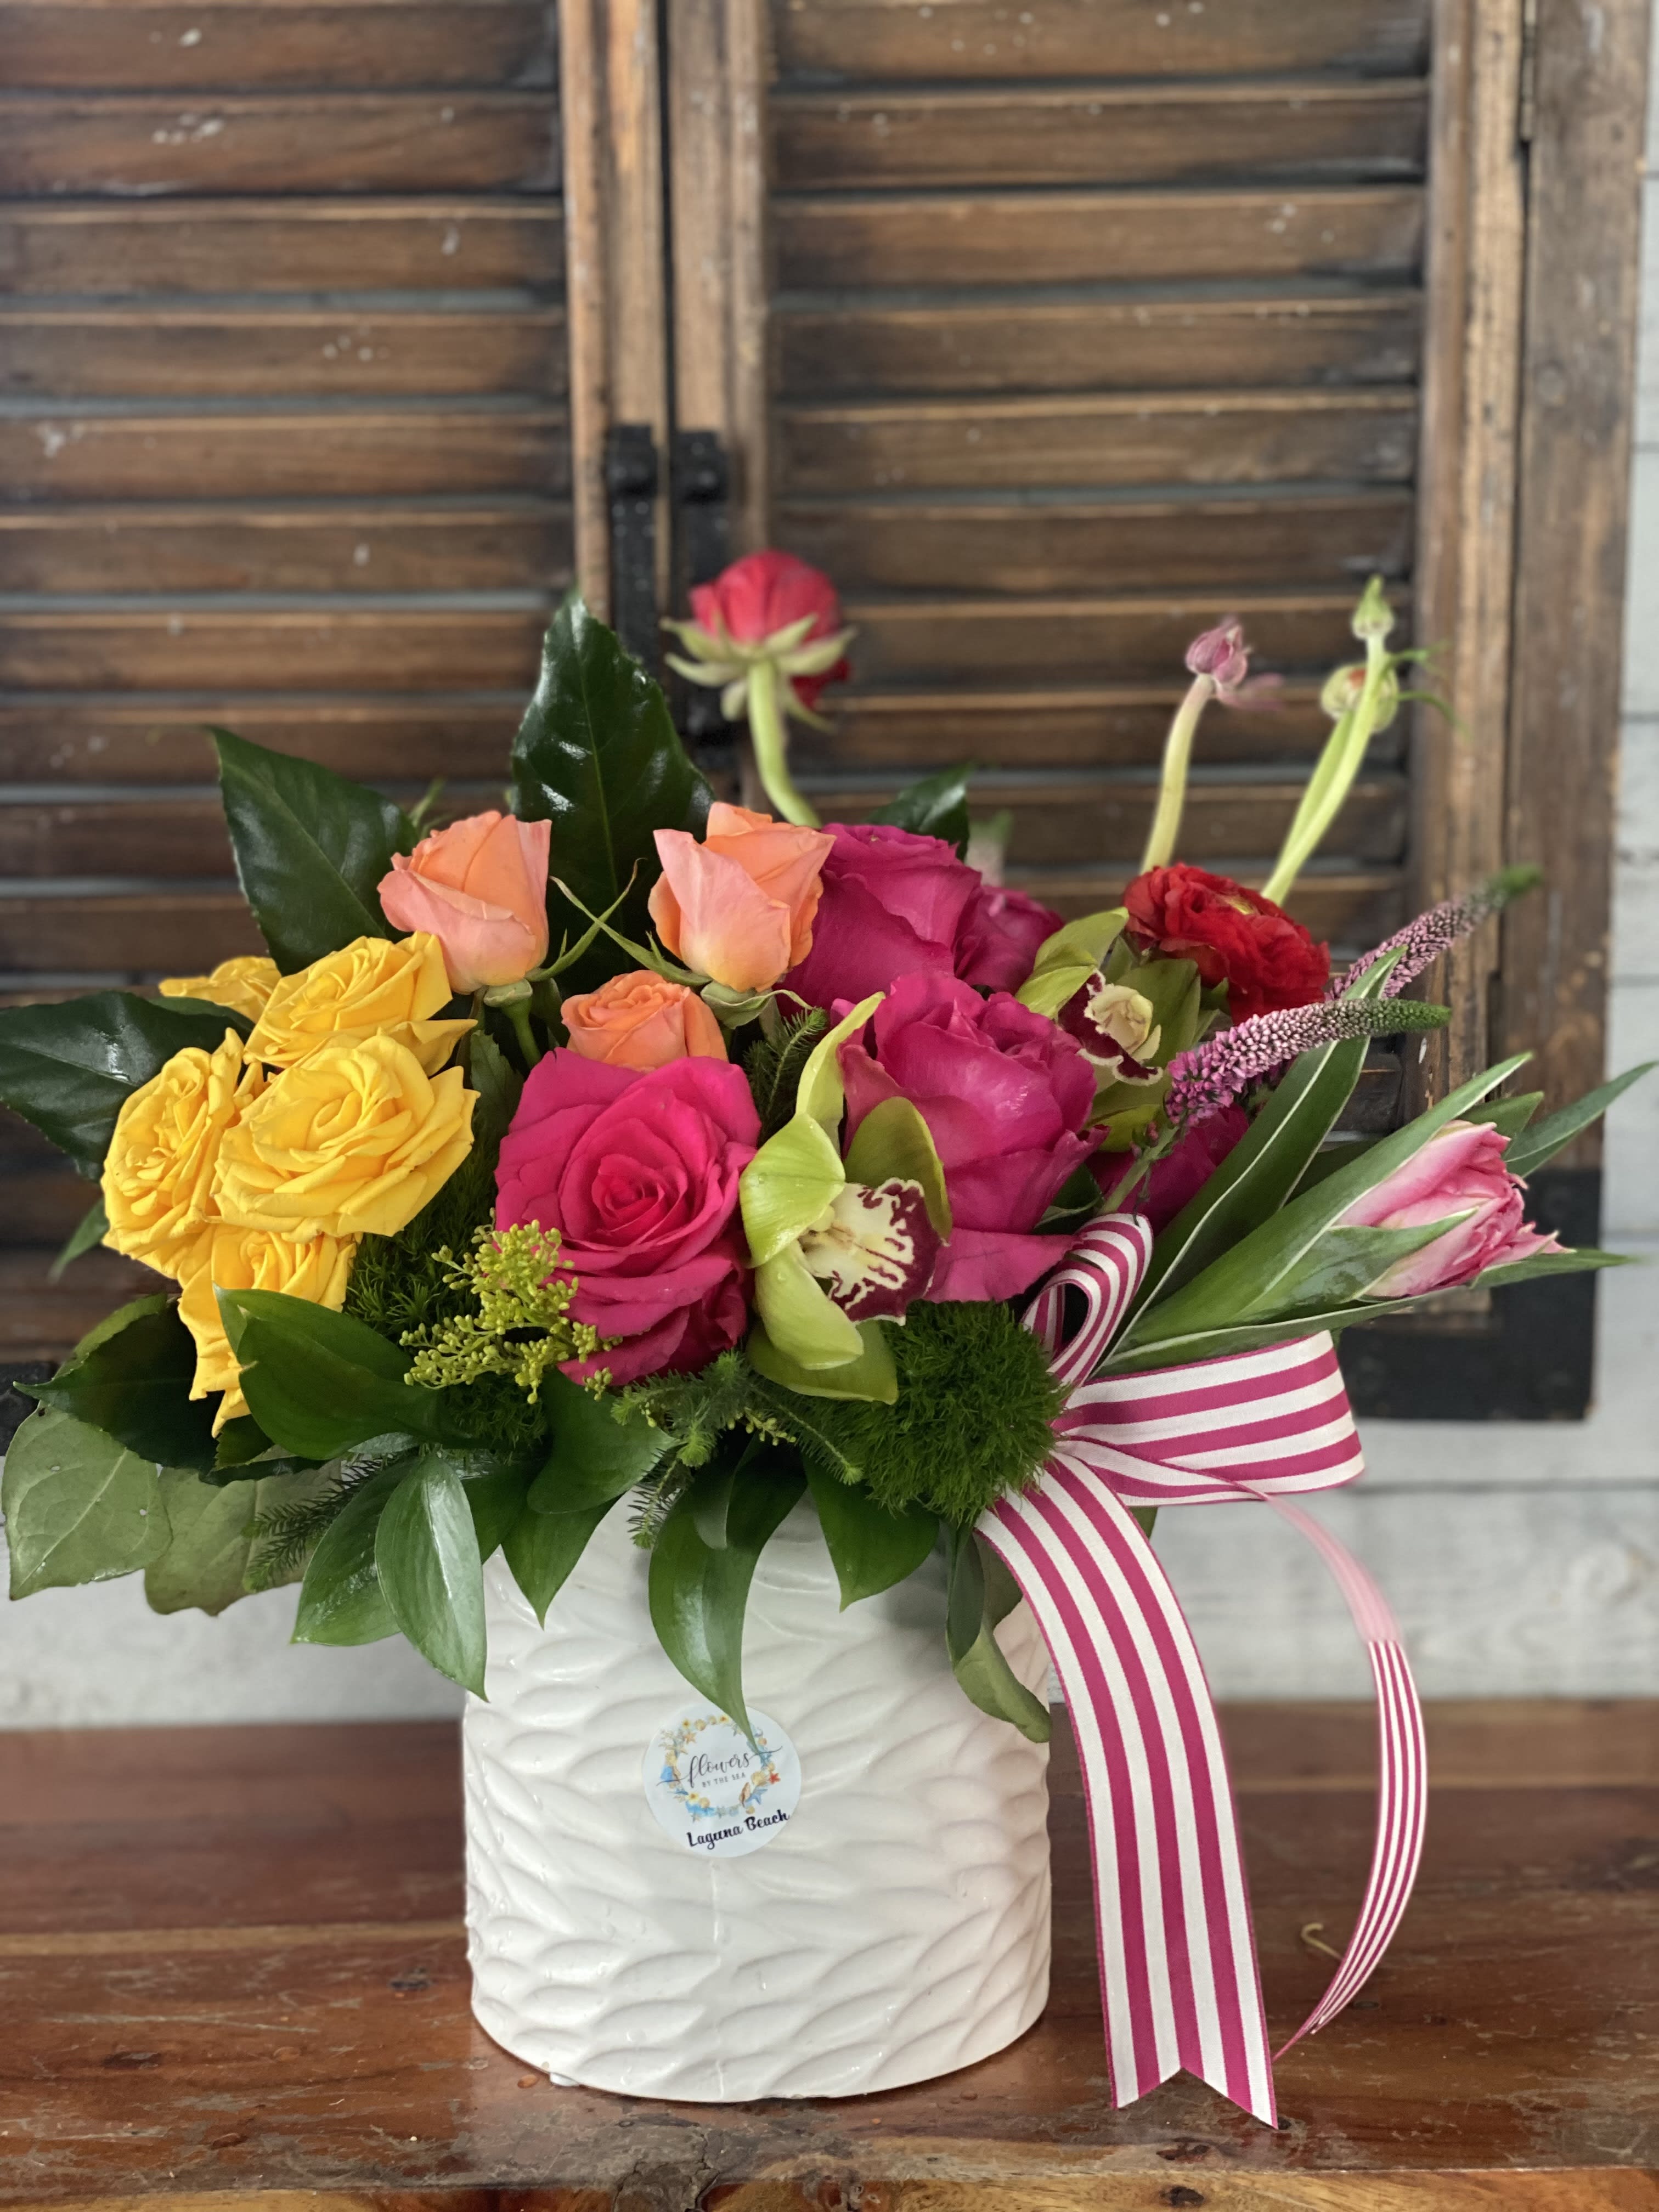 Best Friend  - Handcraft a colorful array of flowers in a white ceramic  vase to create a celebration in bloom. Perfect to give for a special reason or to simply share a smile.